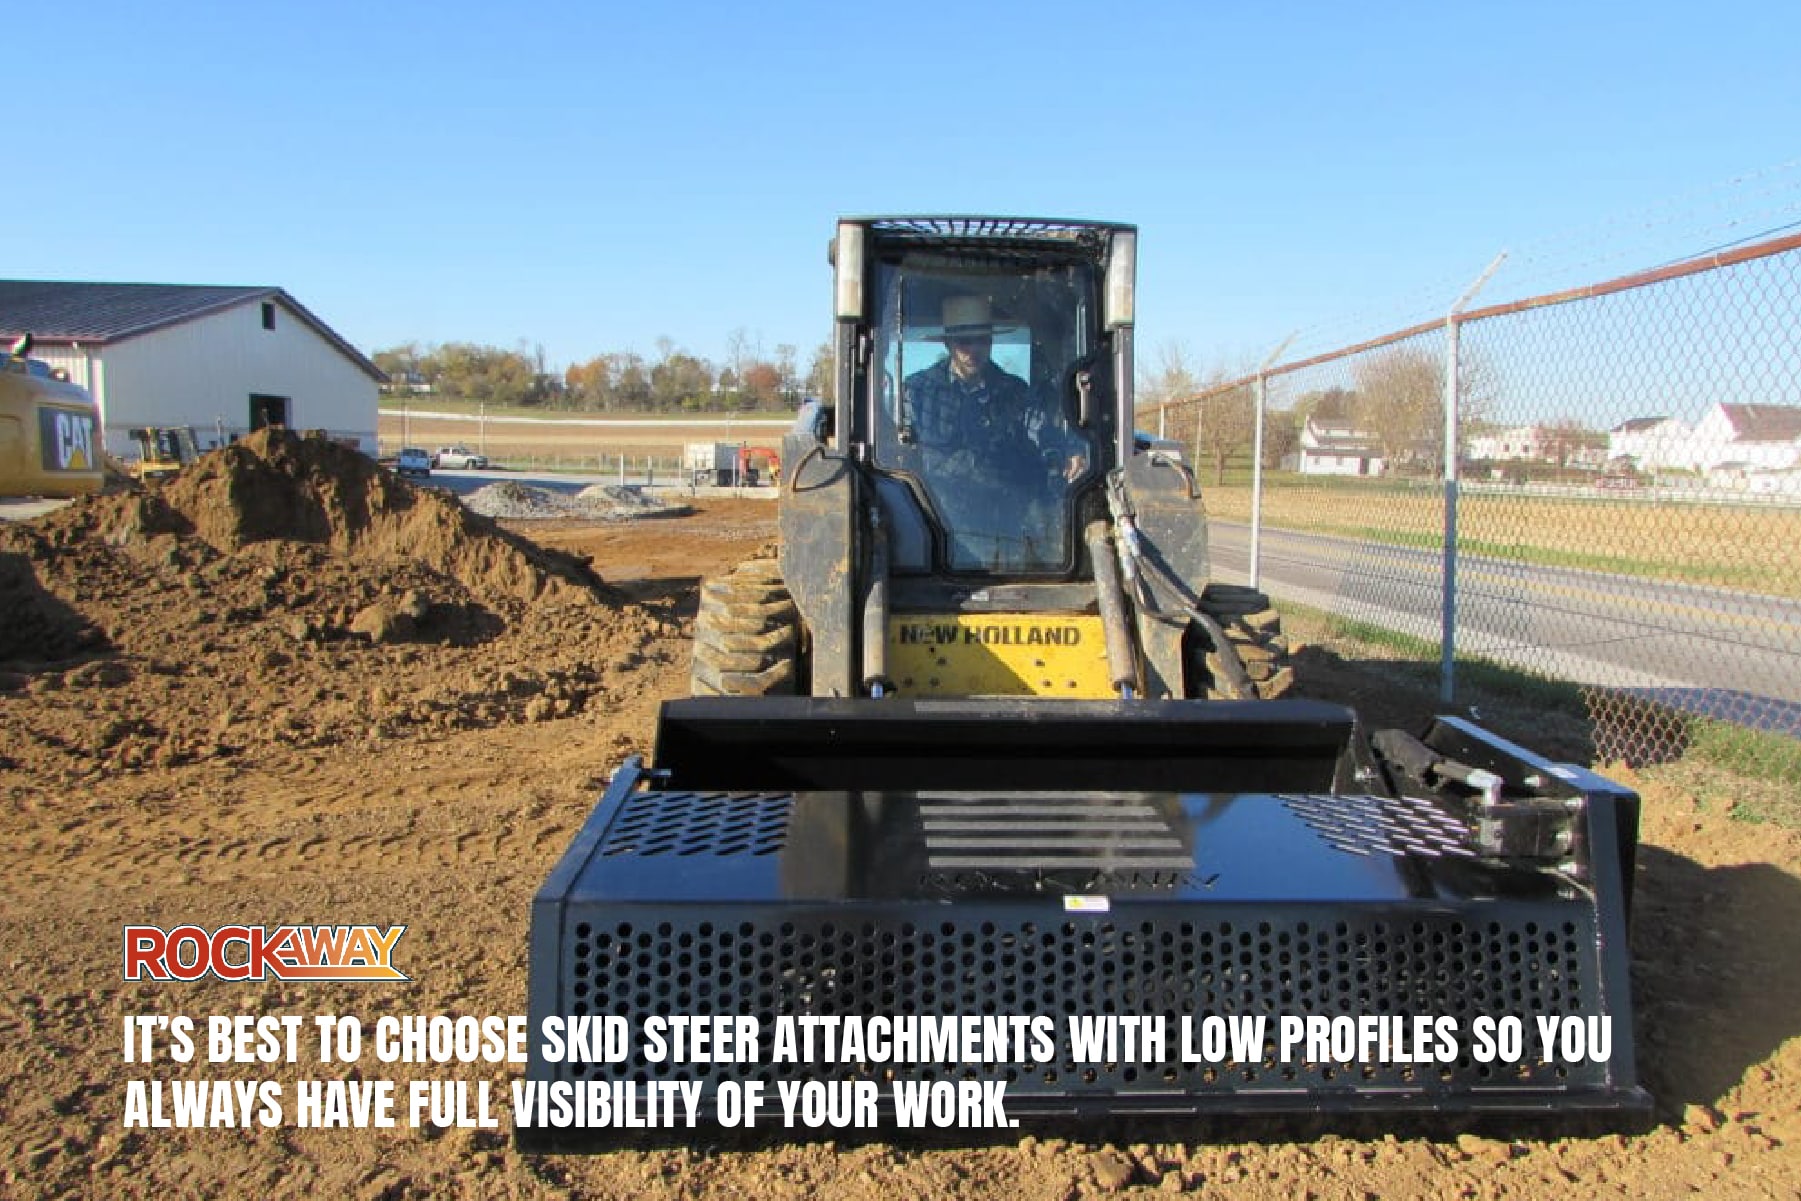 Choose a skidsteer attachment with a low profile